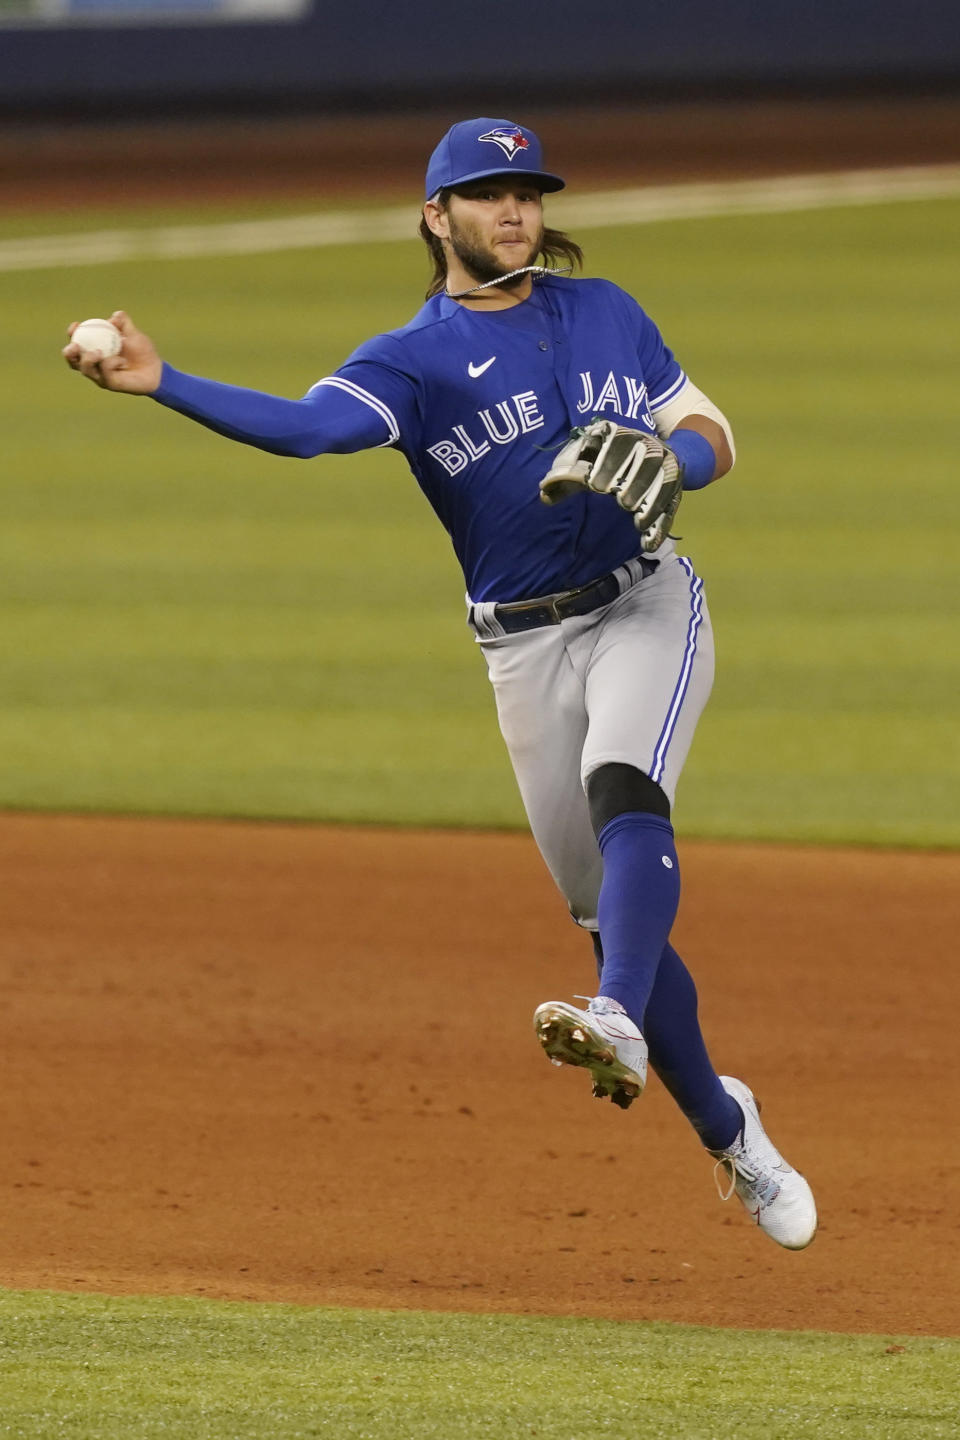 Toronto Blue Jays shortstop Bo Bichette (11) throws to first base on a hit by Miami Marlins' Starling Marte during the ninth inning of a baseball game, Tuesday, June 22, 2021, in Miami. The Blue Jays defeated the Marlins 2-1. (AP Photo/Marta Lavandier)